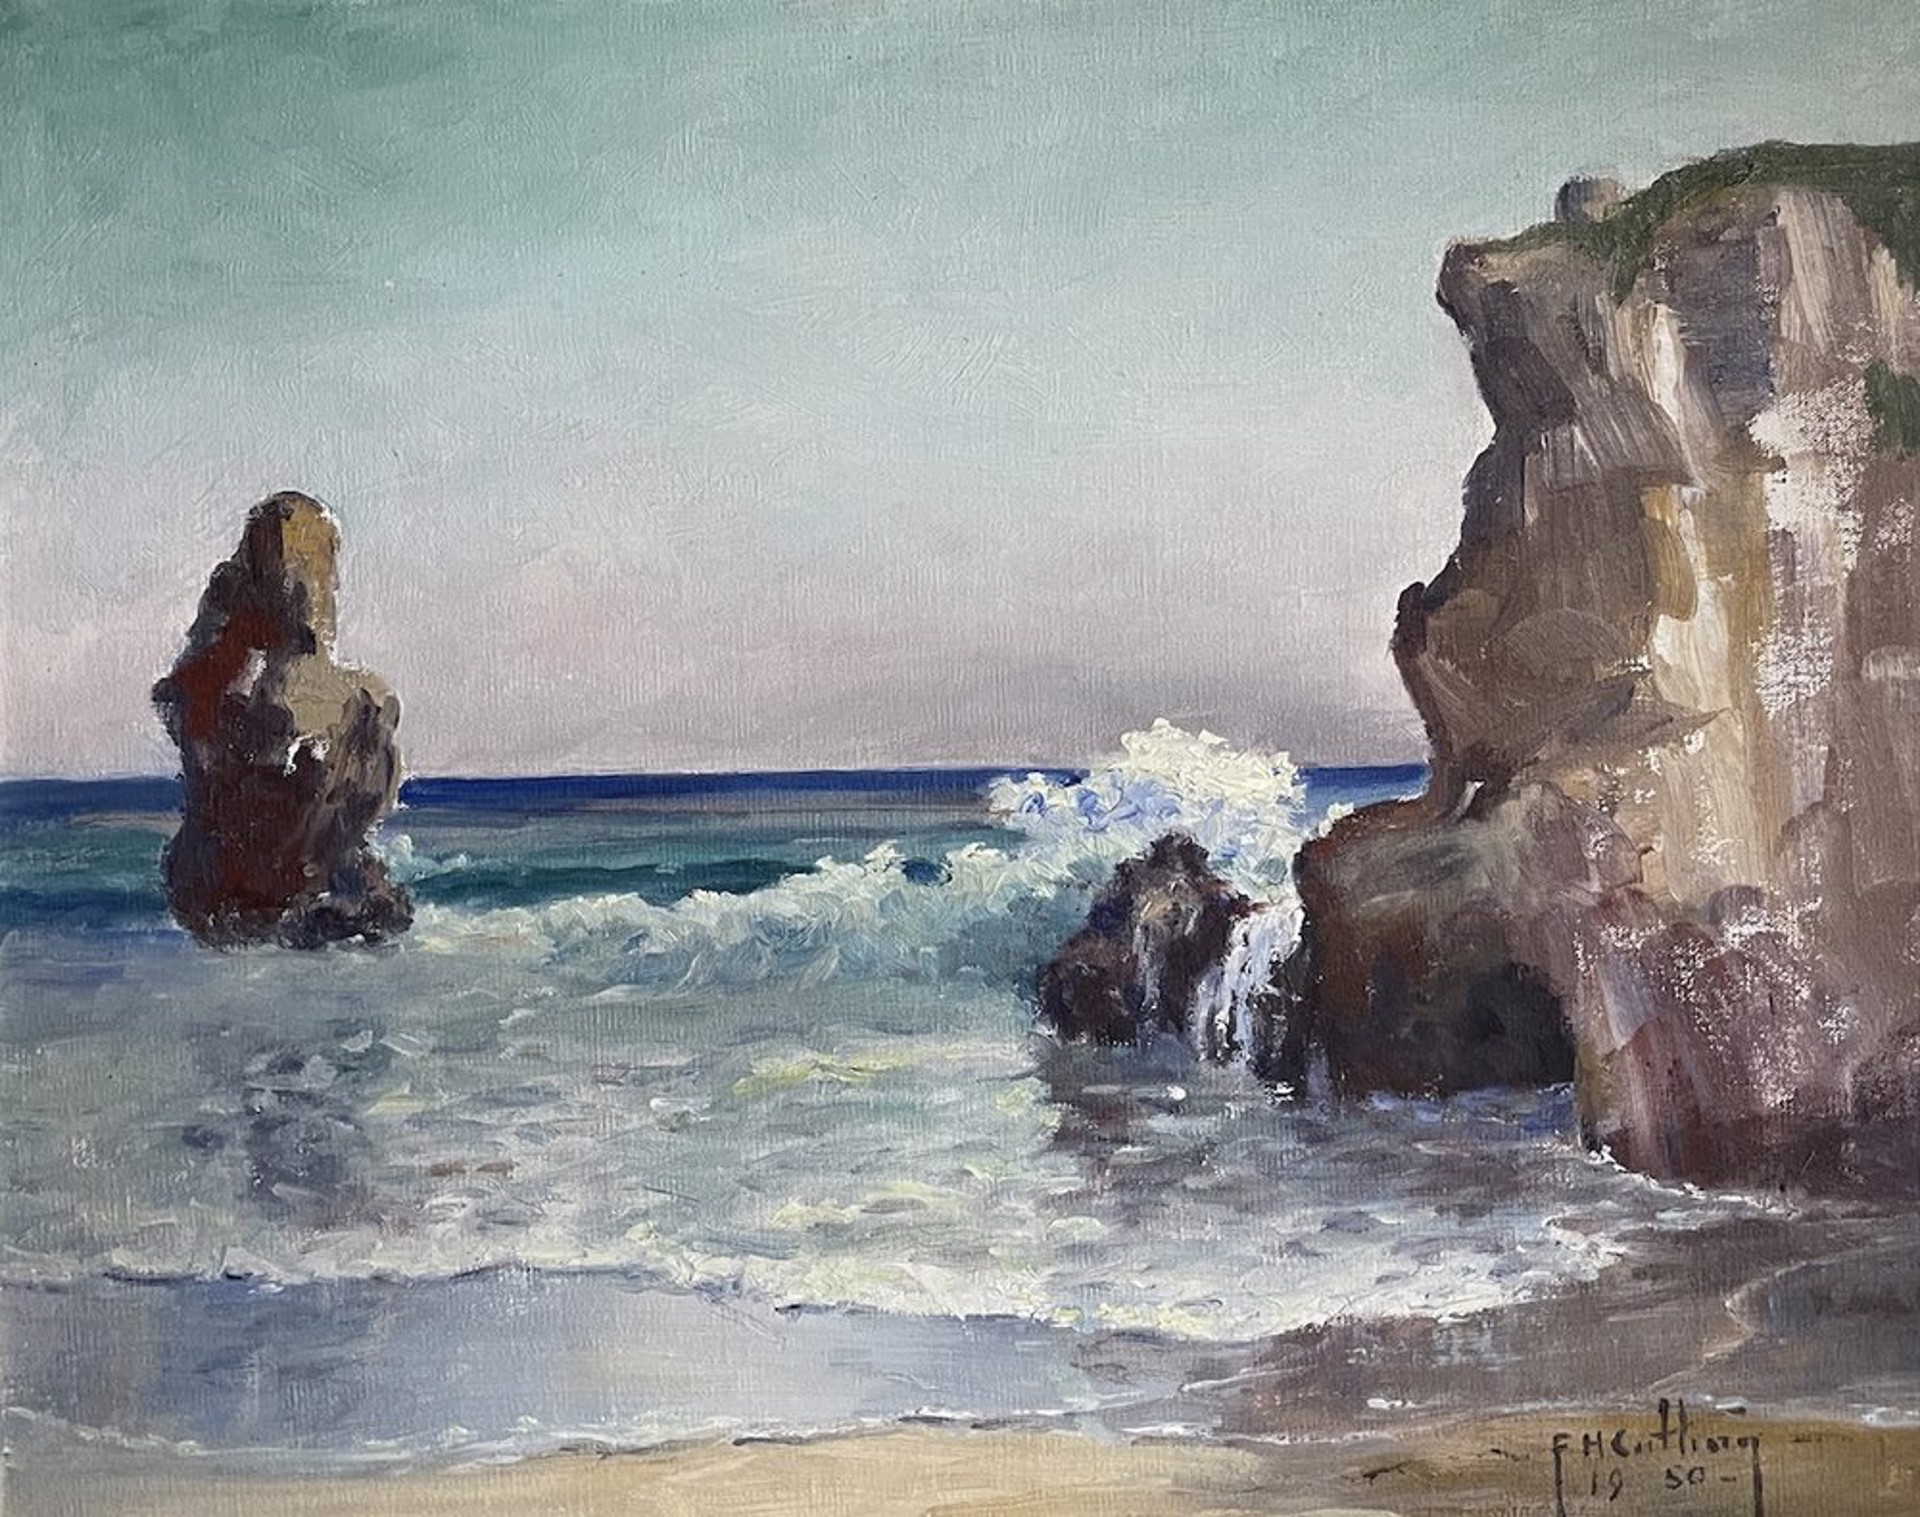 Untitled (seascape with rocks) by Frank Harvey Cutting